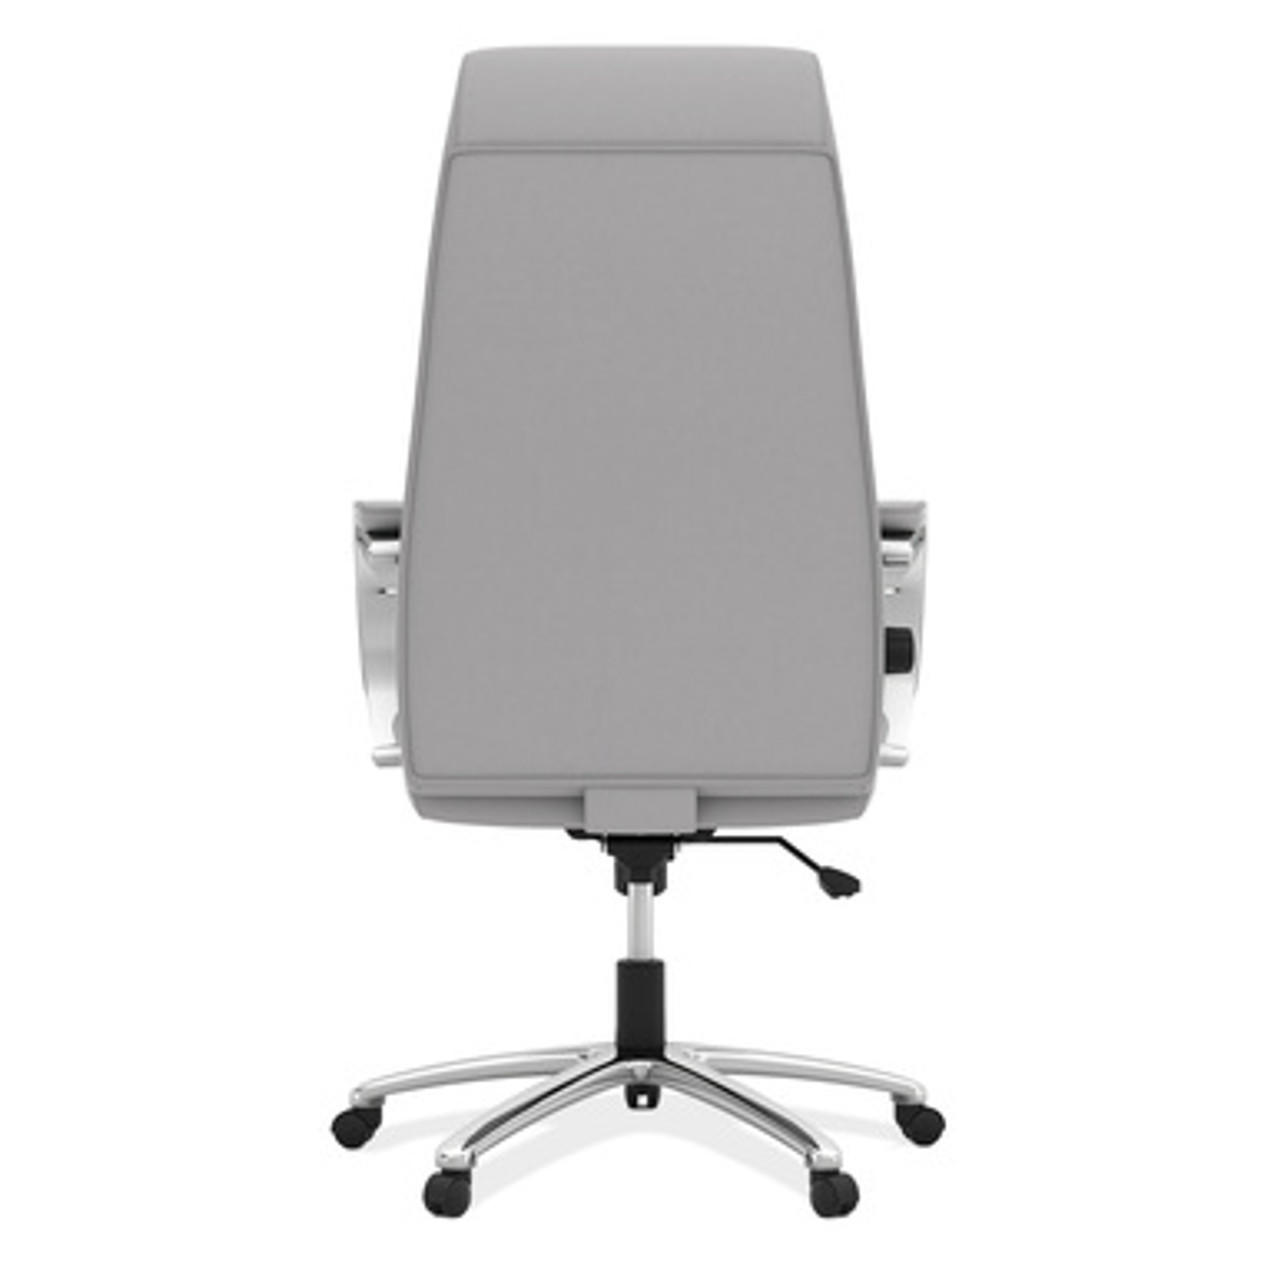  Office Source Bradley Antimicrobial Executive Conference Chair 74011A 